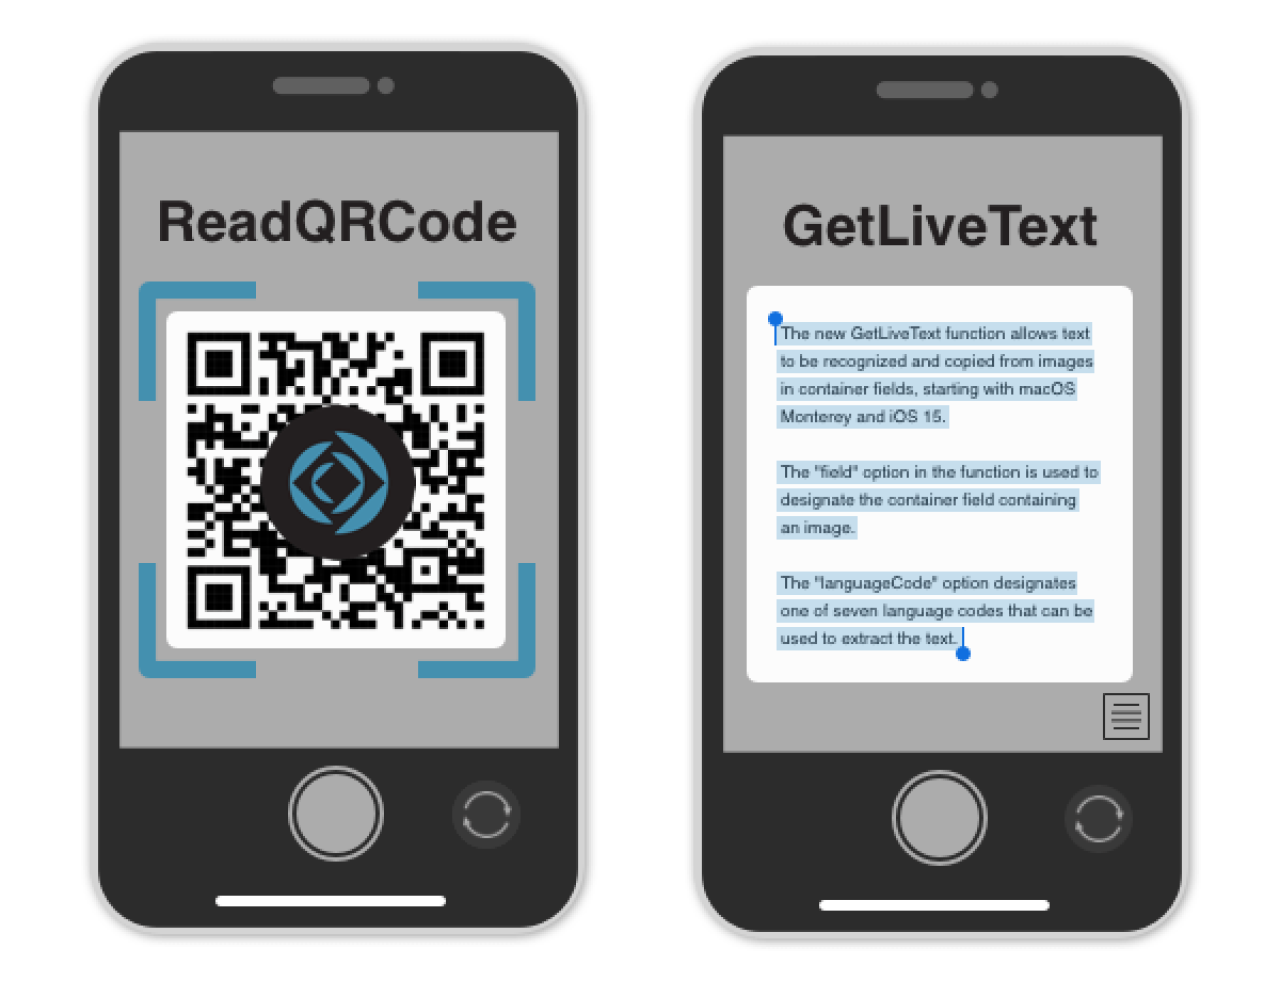 filemaker readqrcode function and getlivetext function.